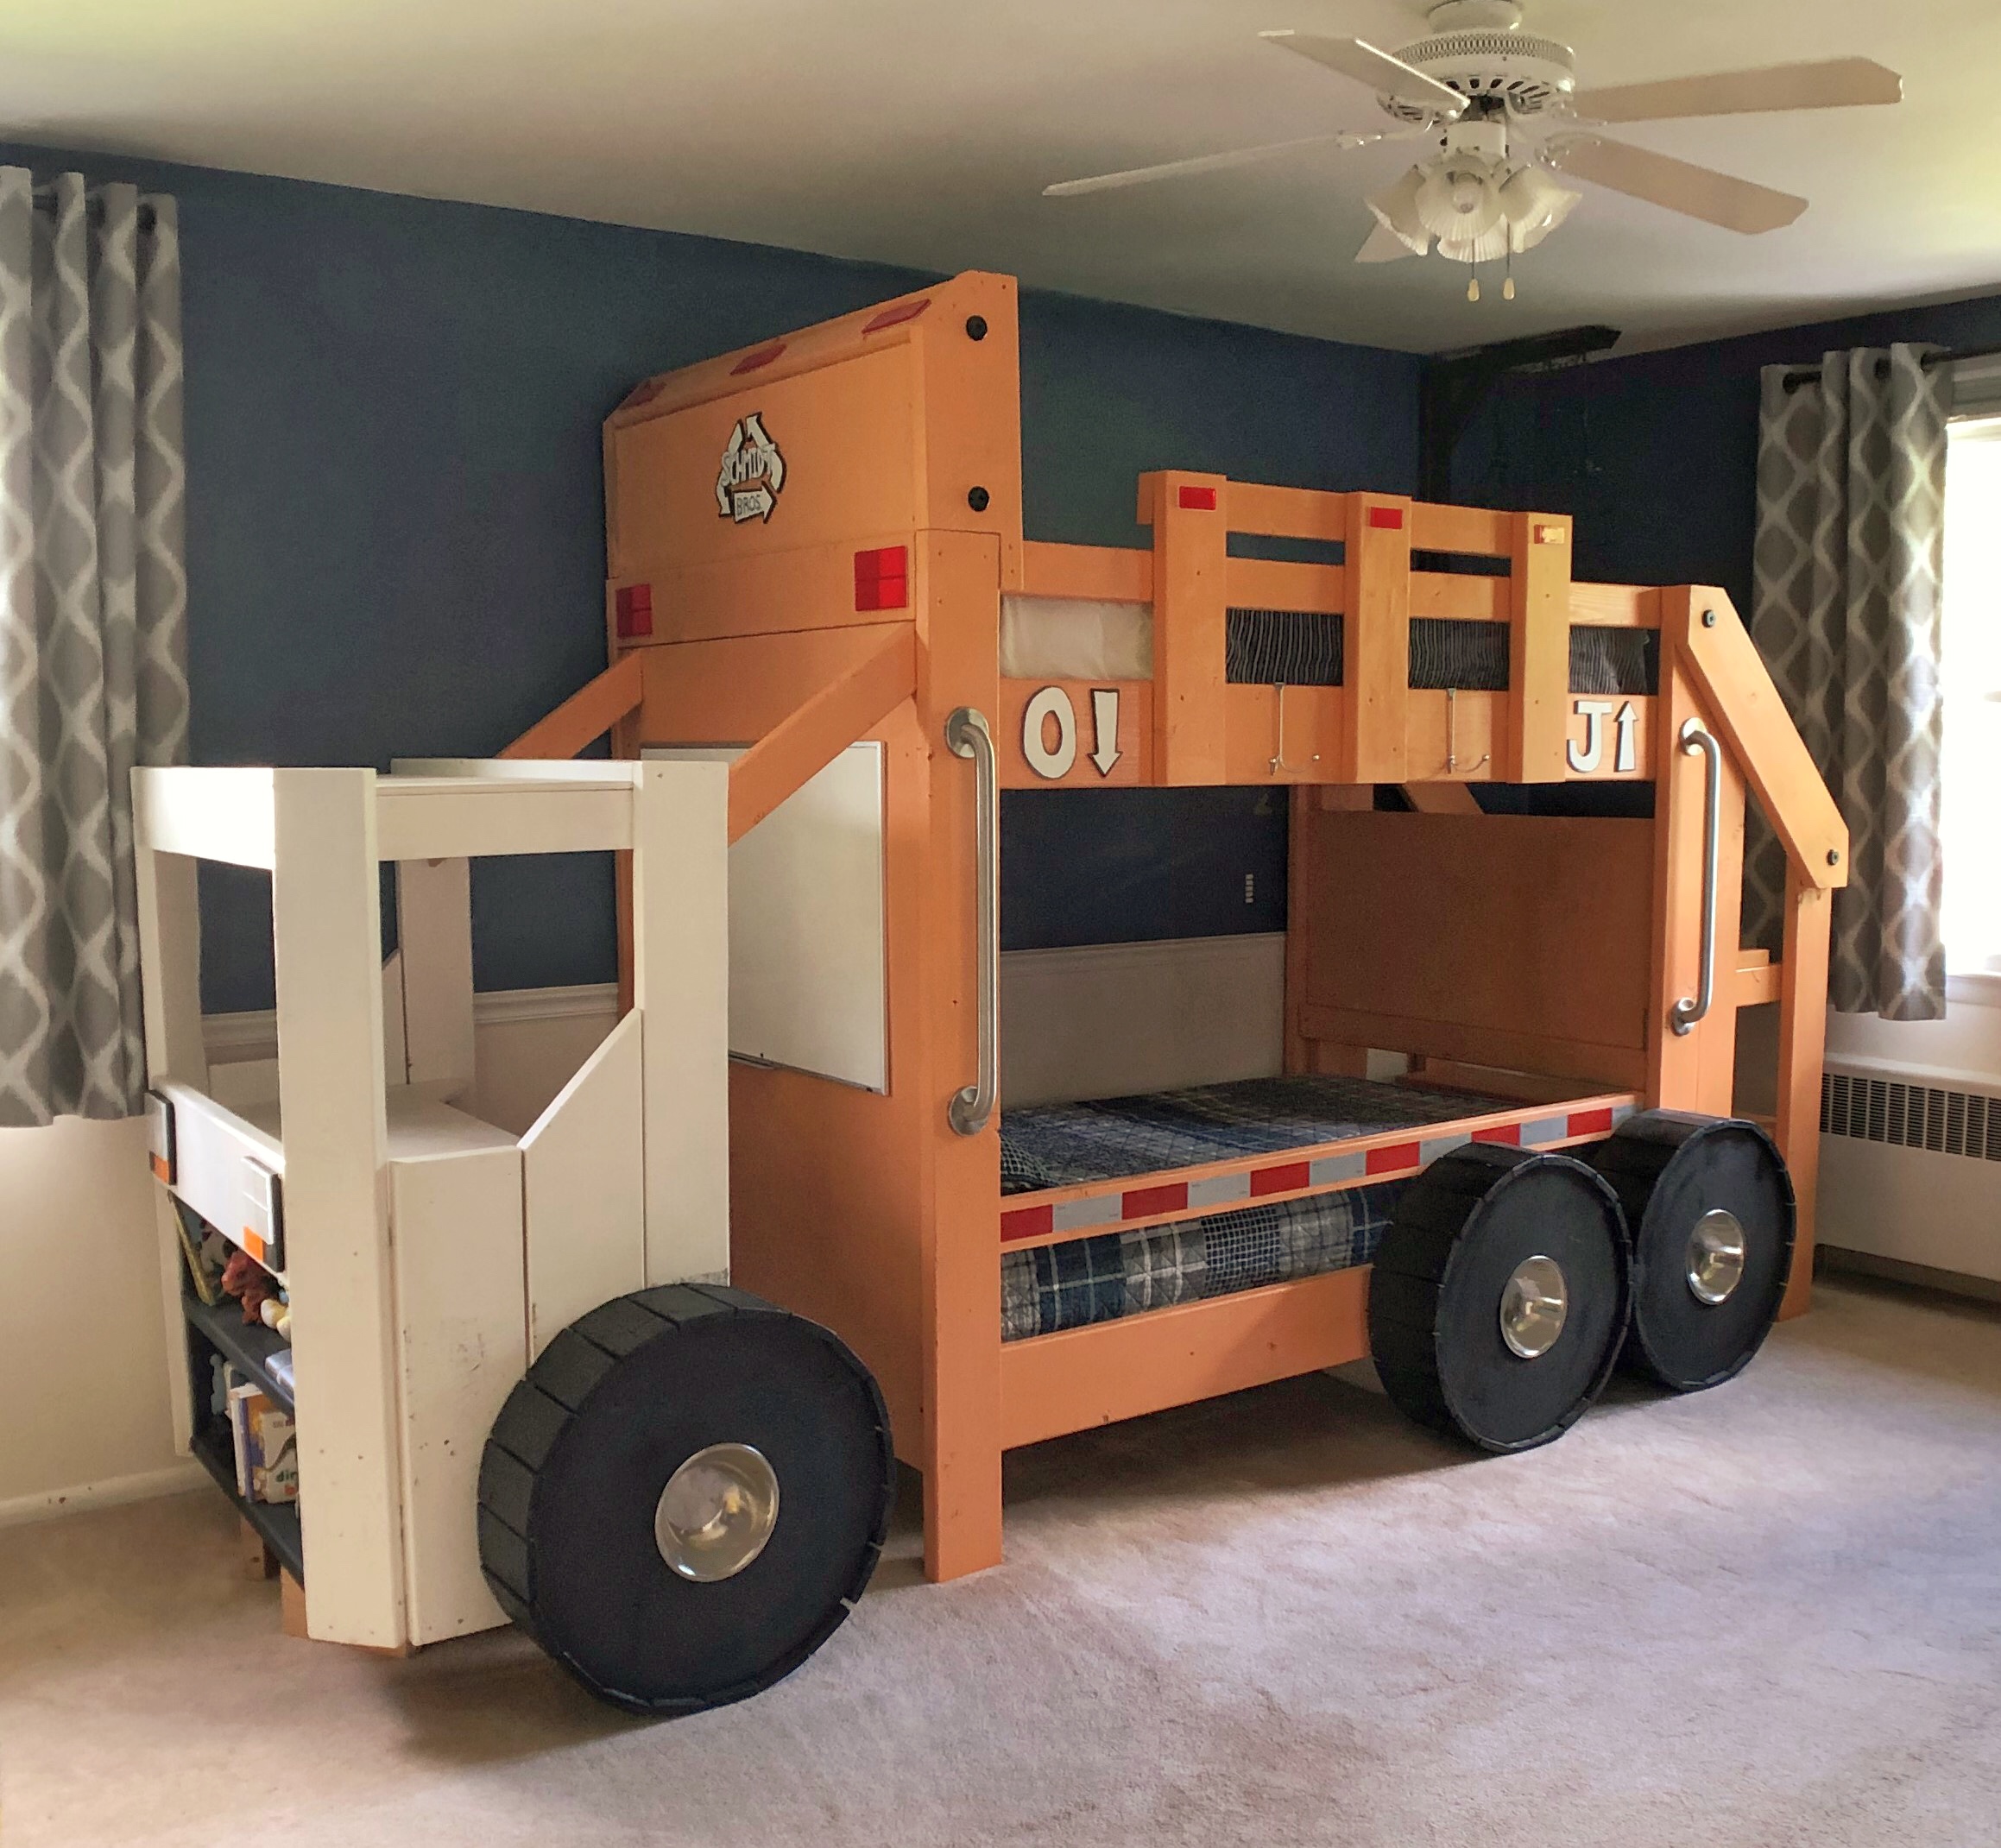 Garbage Truck Bunk Bed Twin Beds, Tractor Trailer Bunk Bed